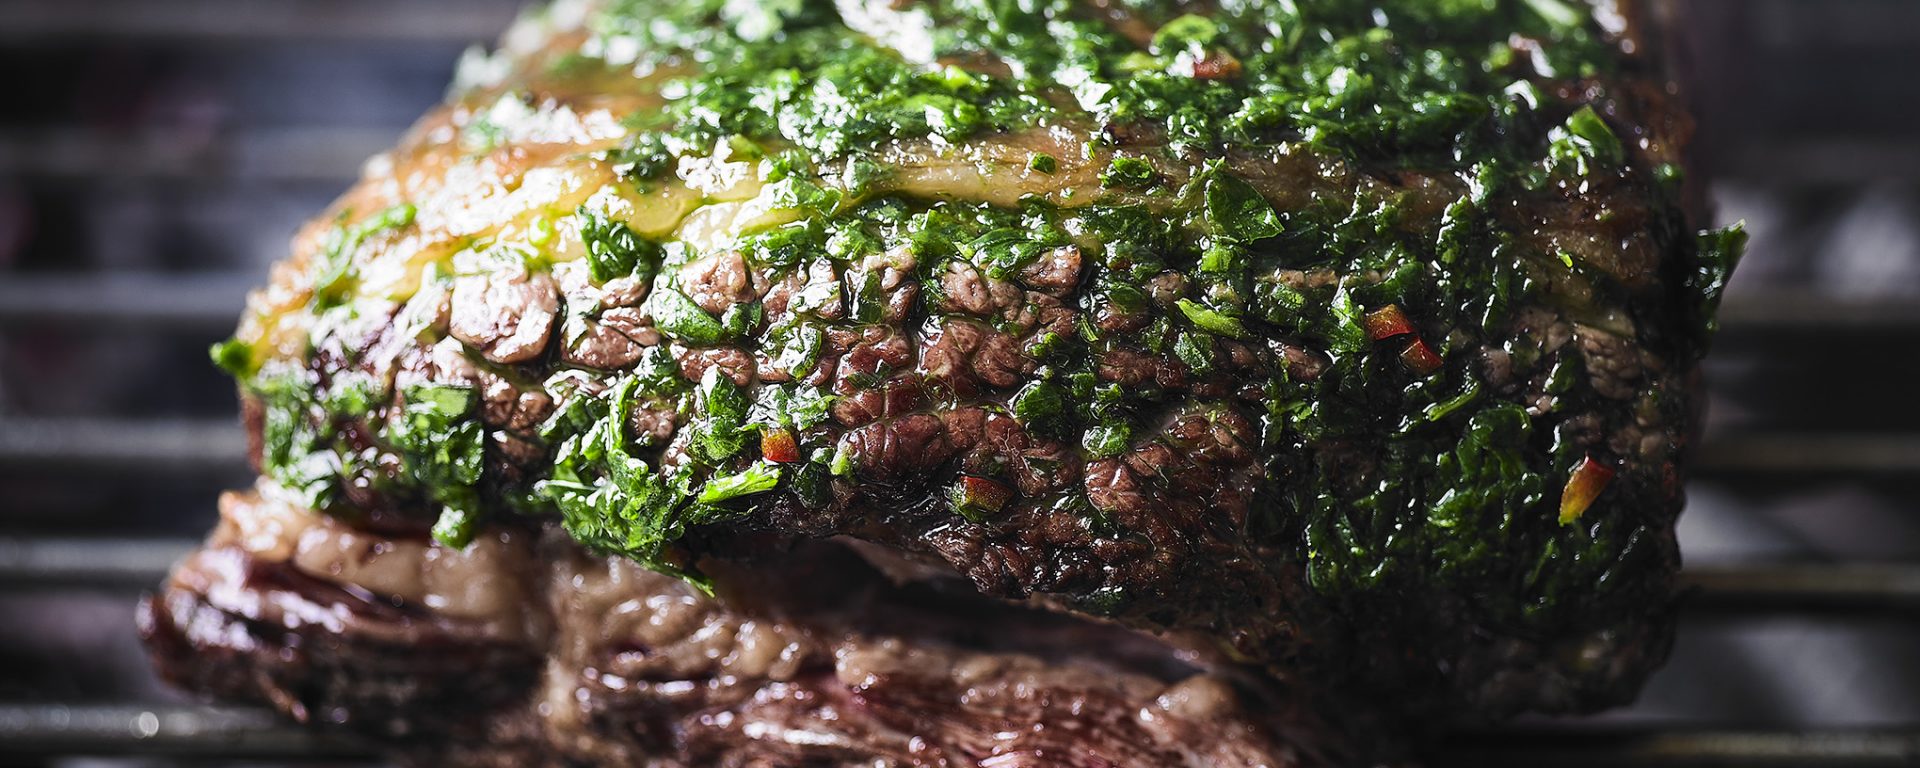 Whole Grilled Flank Steak With Wild Garlic Chimichurri Harvey Norman 